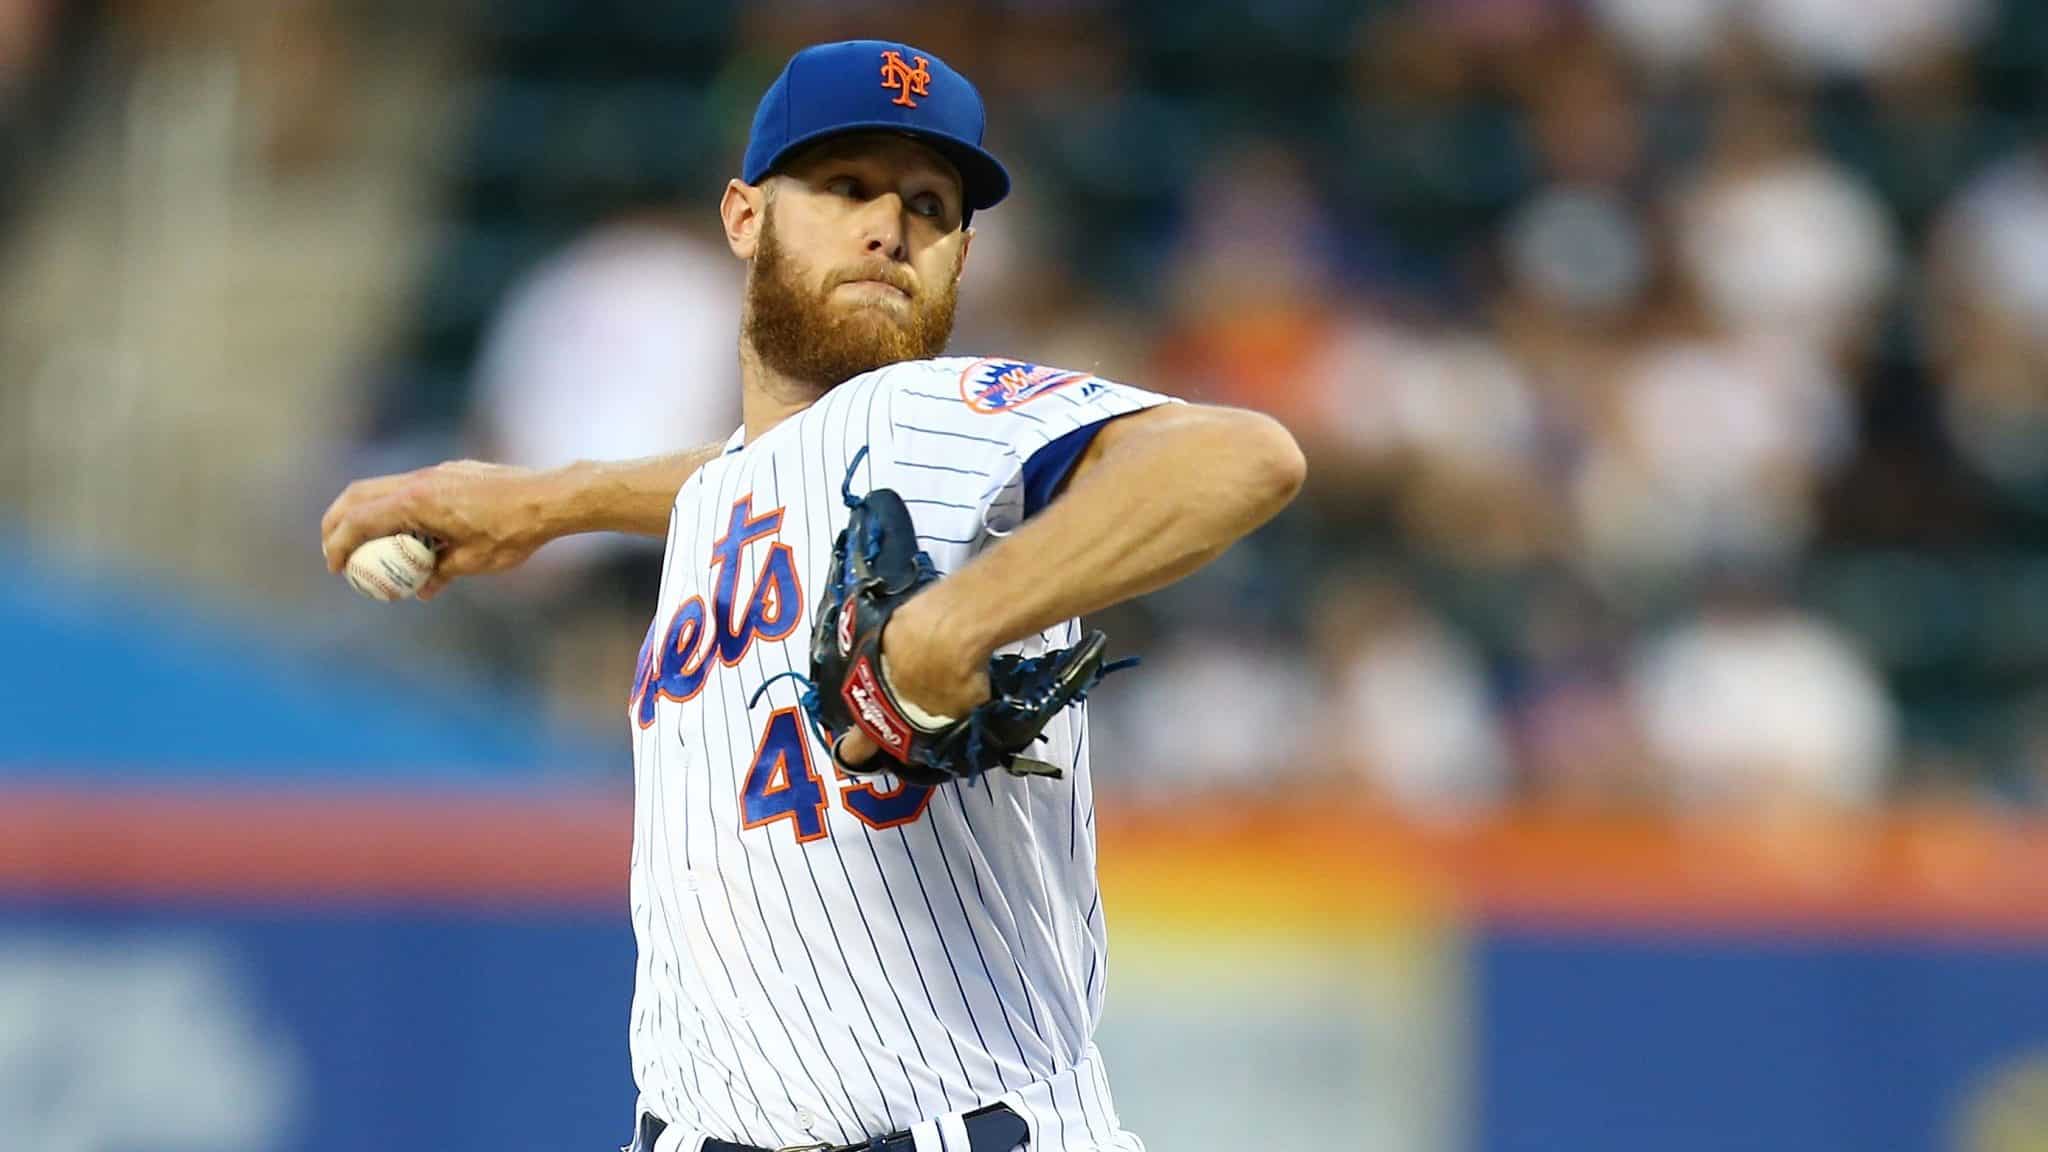 NEW YORK, NEW YORK - AUGUST 06: Zack Wheeler #45 of the New York Mets pitches in the second inning against the Miami Marlins at Citi Field on August 06, 2019 in New York City.